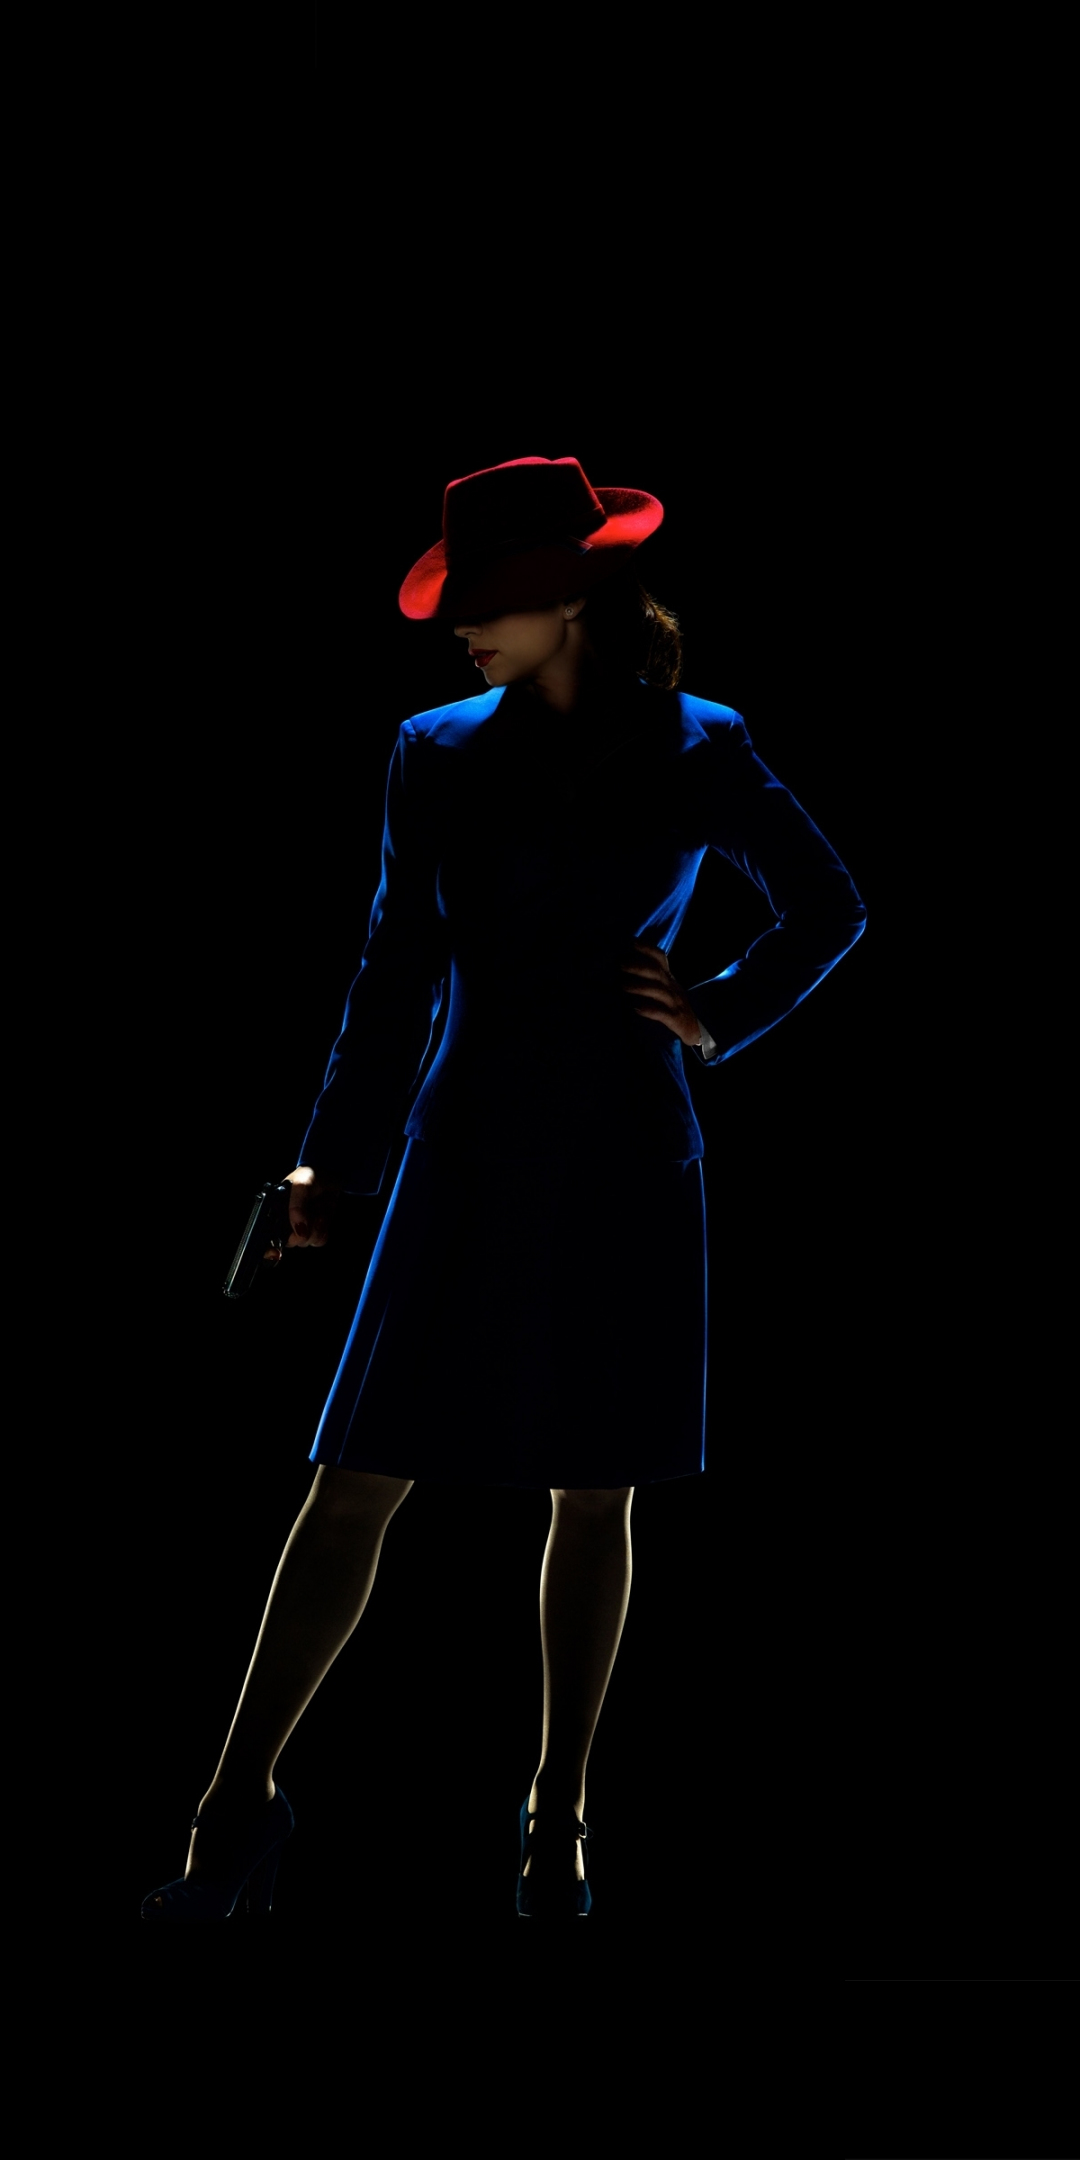 Download 1080x2160 Wallpaper Hayley Atwell Agent Carter Dark Silhouette Honor 7x Honor 9 Lite Honor View 10 Hd Image Background